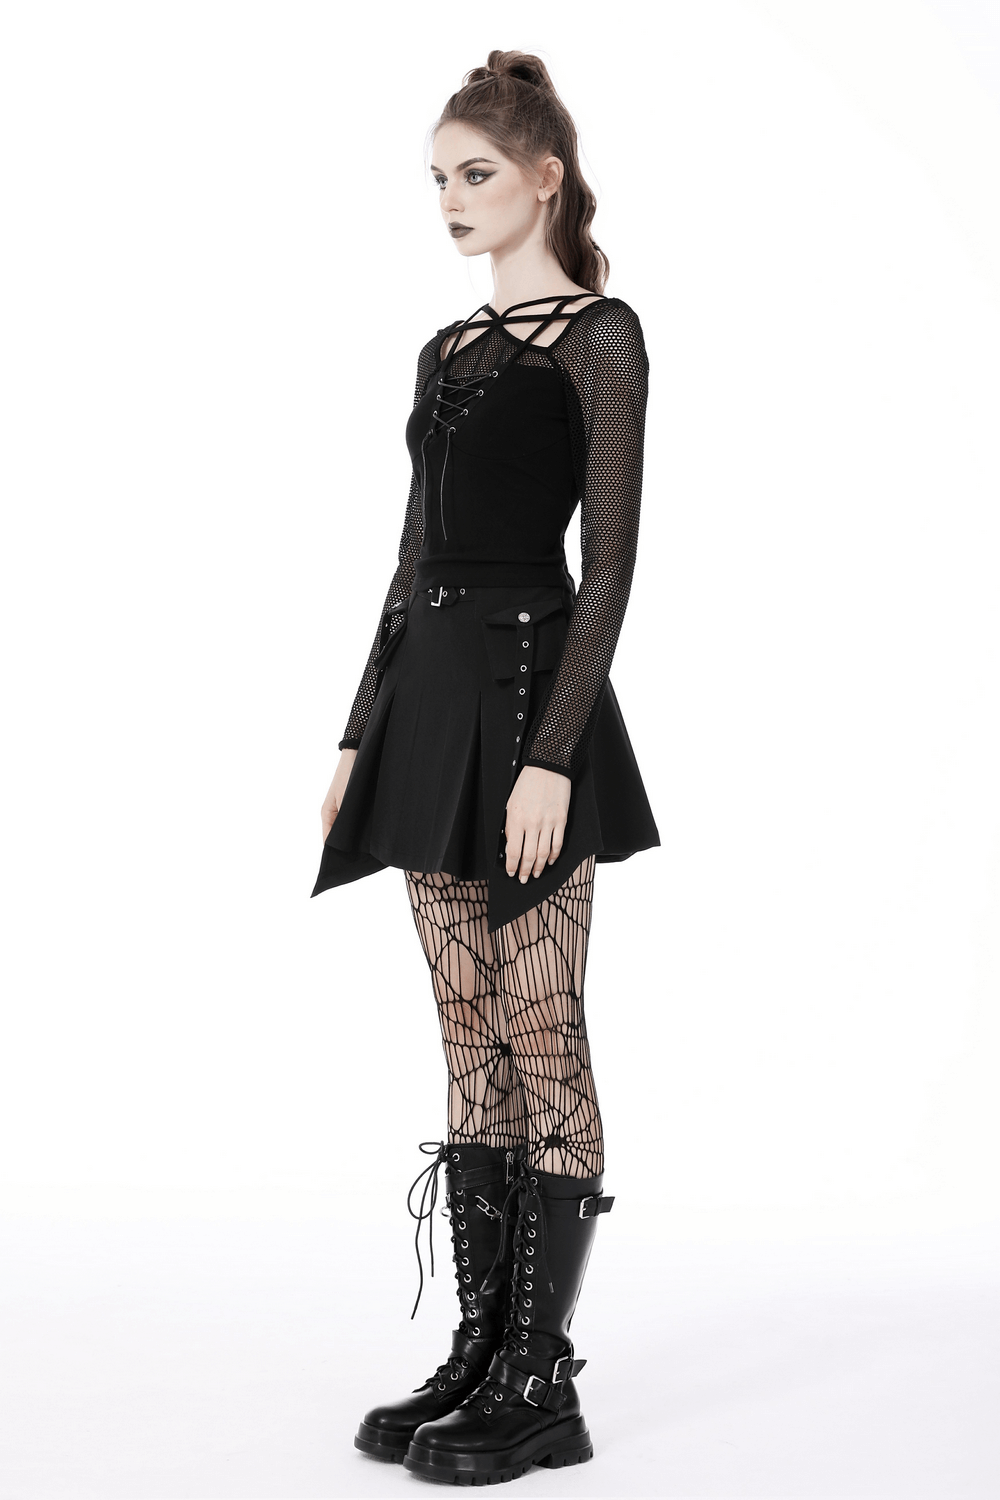 Dark Punk Gothic Net Lace Up Top with Mesh Sleeves